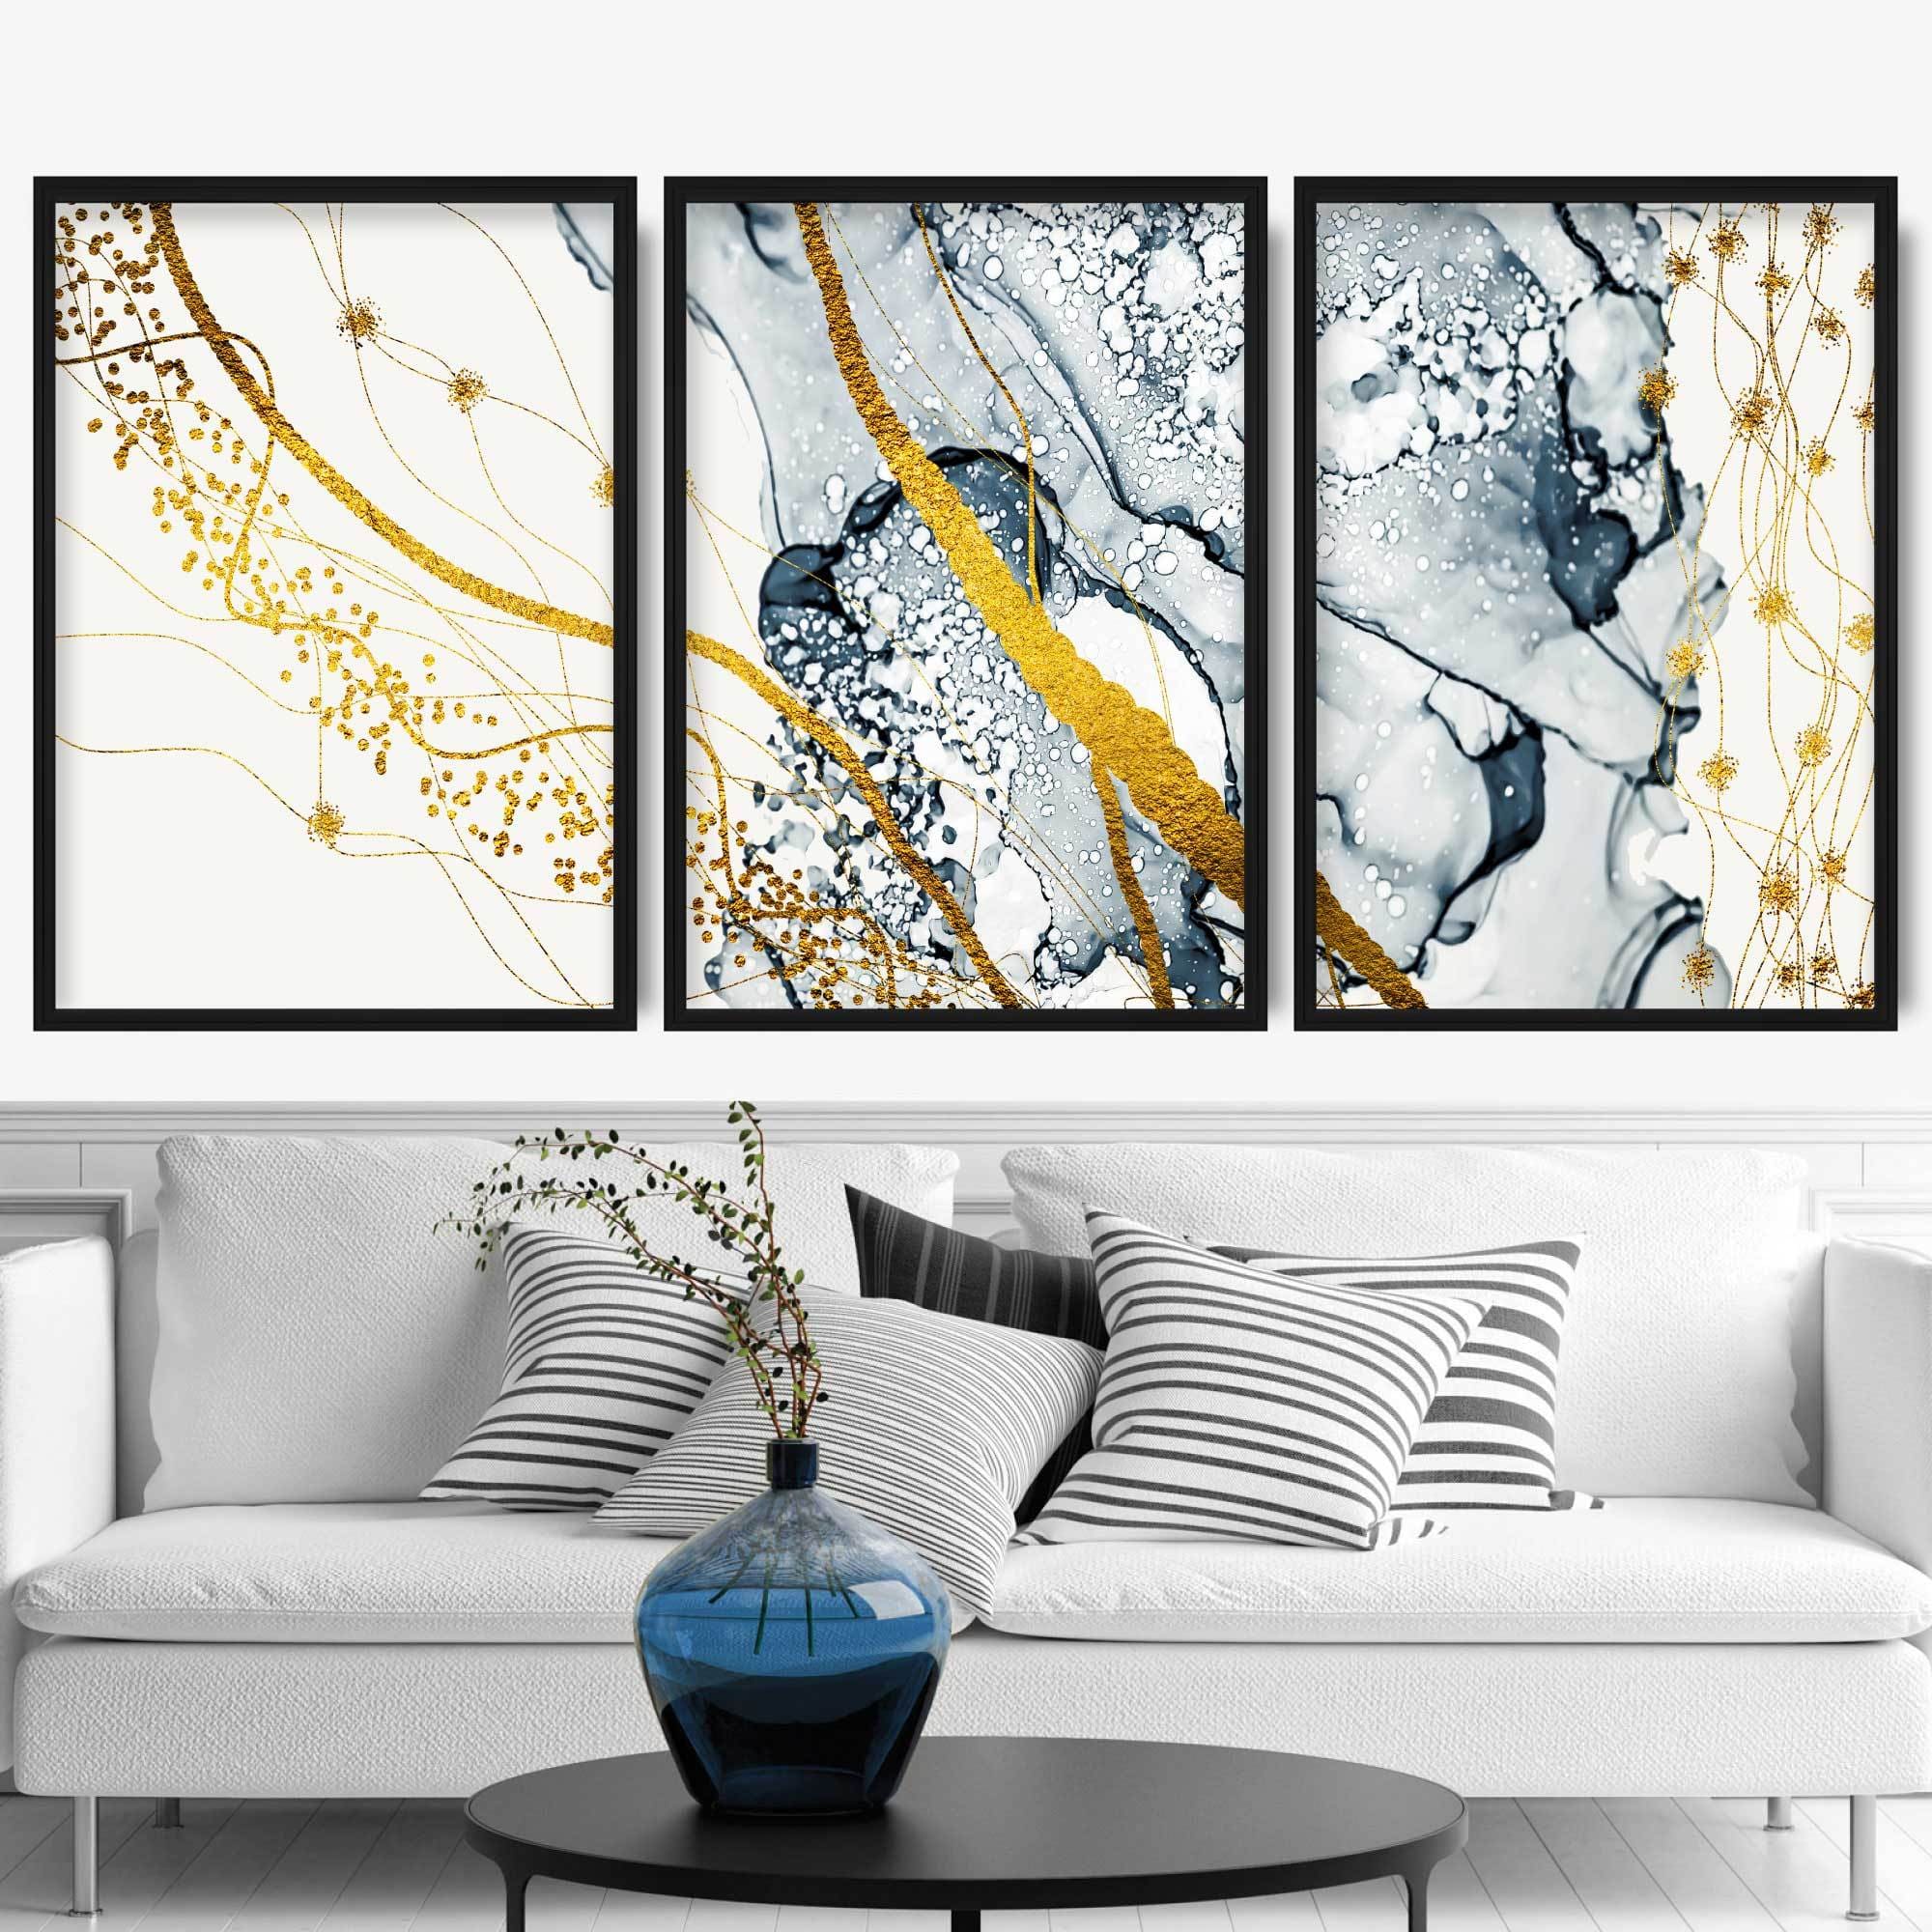 Set of 3 Navy & Yellow Gold Abstract Art Prints